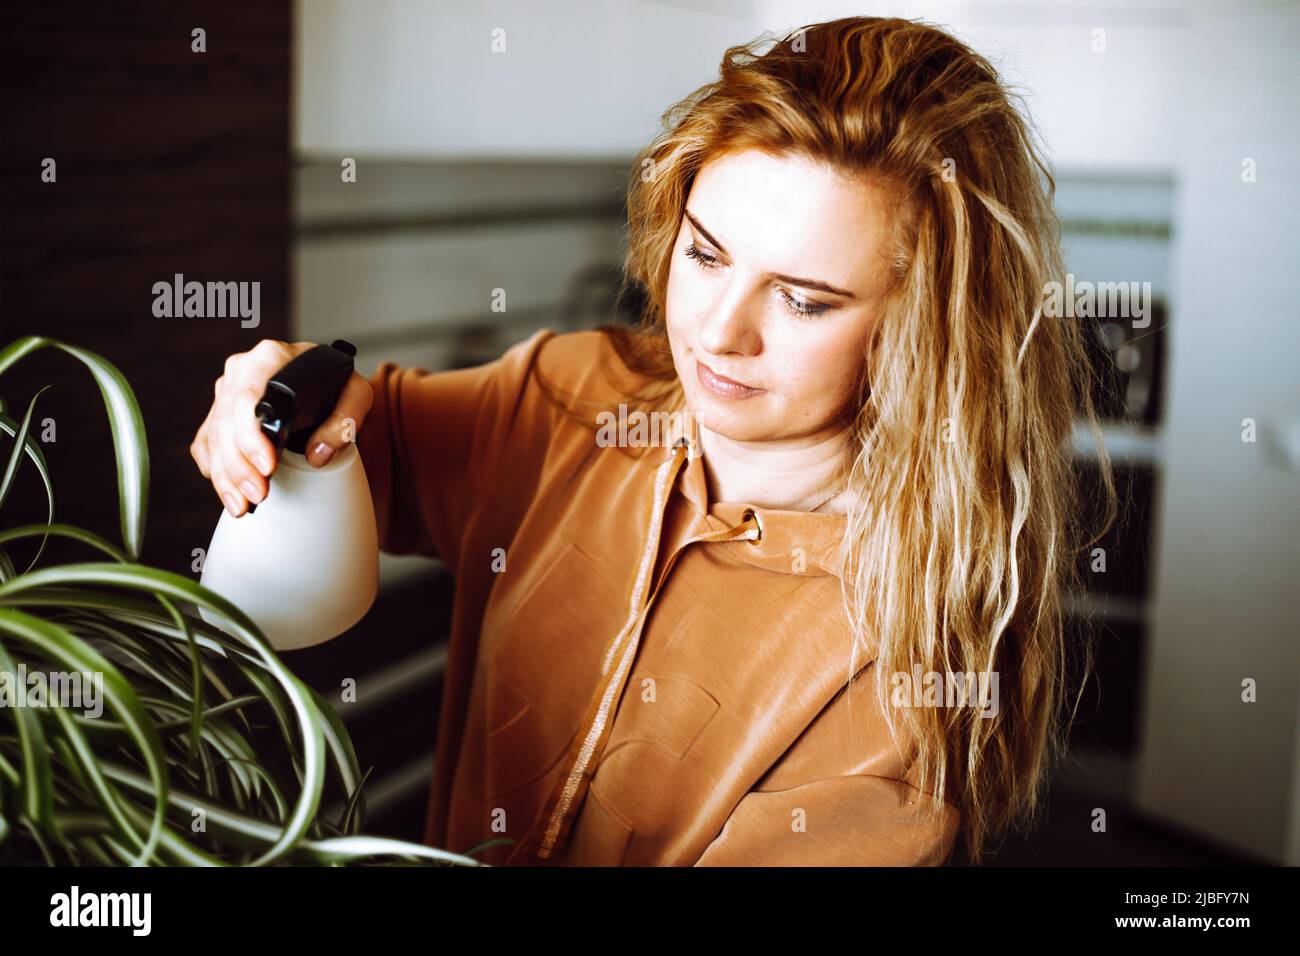 Portrait of young beautiful woman with long wavy fair hair wearing brown sweatshirt, watering indoor plant Chlorophytum. Stock Photo